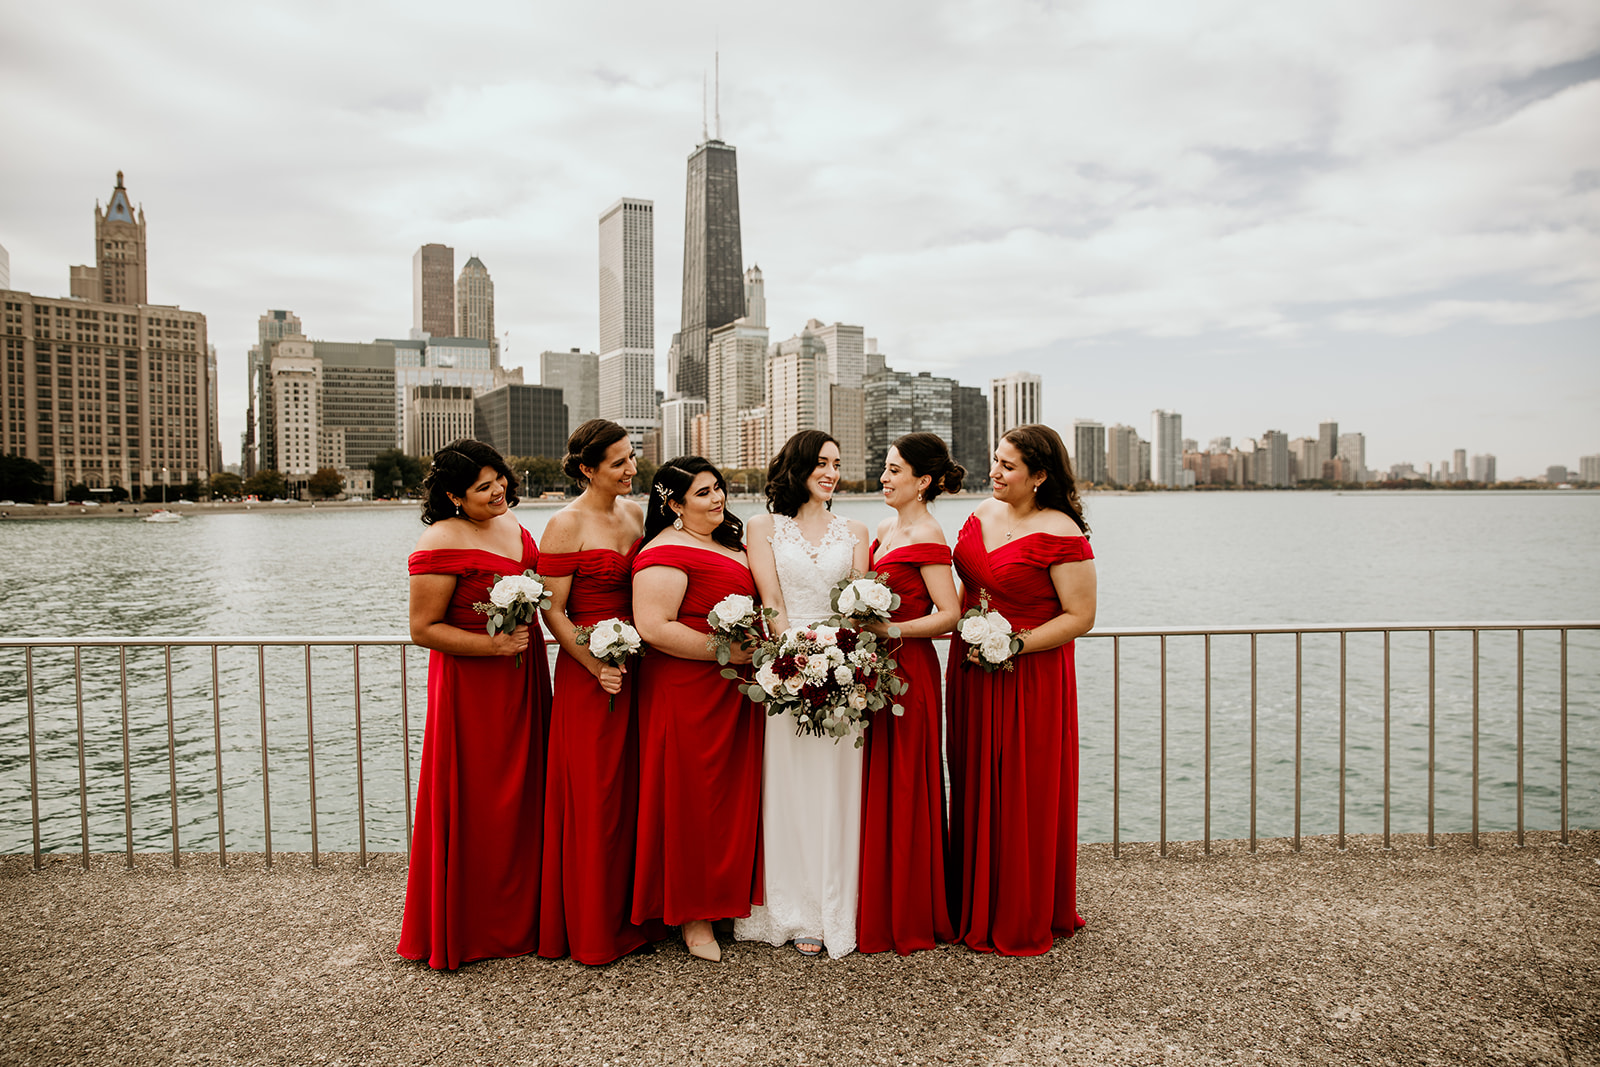 Bride and bridesmaids in red dresses looking at each other in front of the chicago skyline.